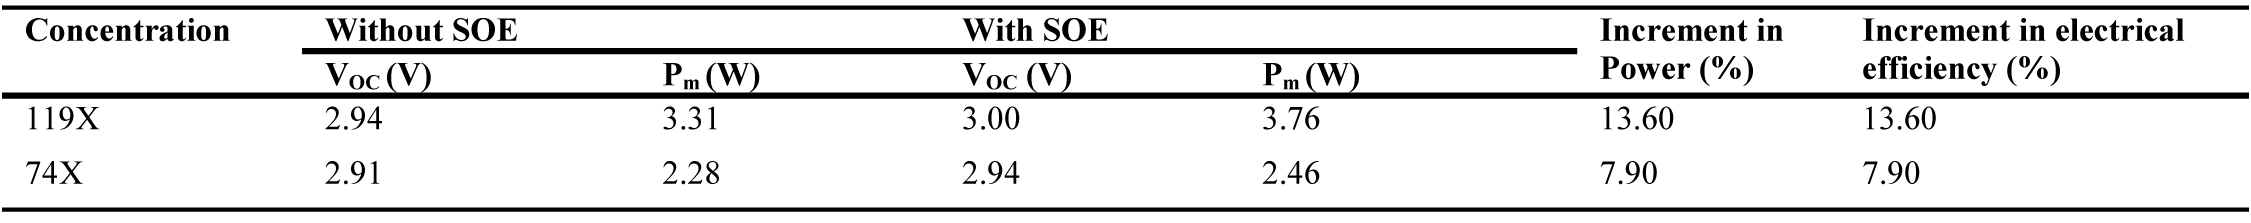 Summary of optical and electrical examinations with and without SOE.